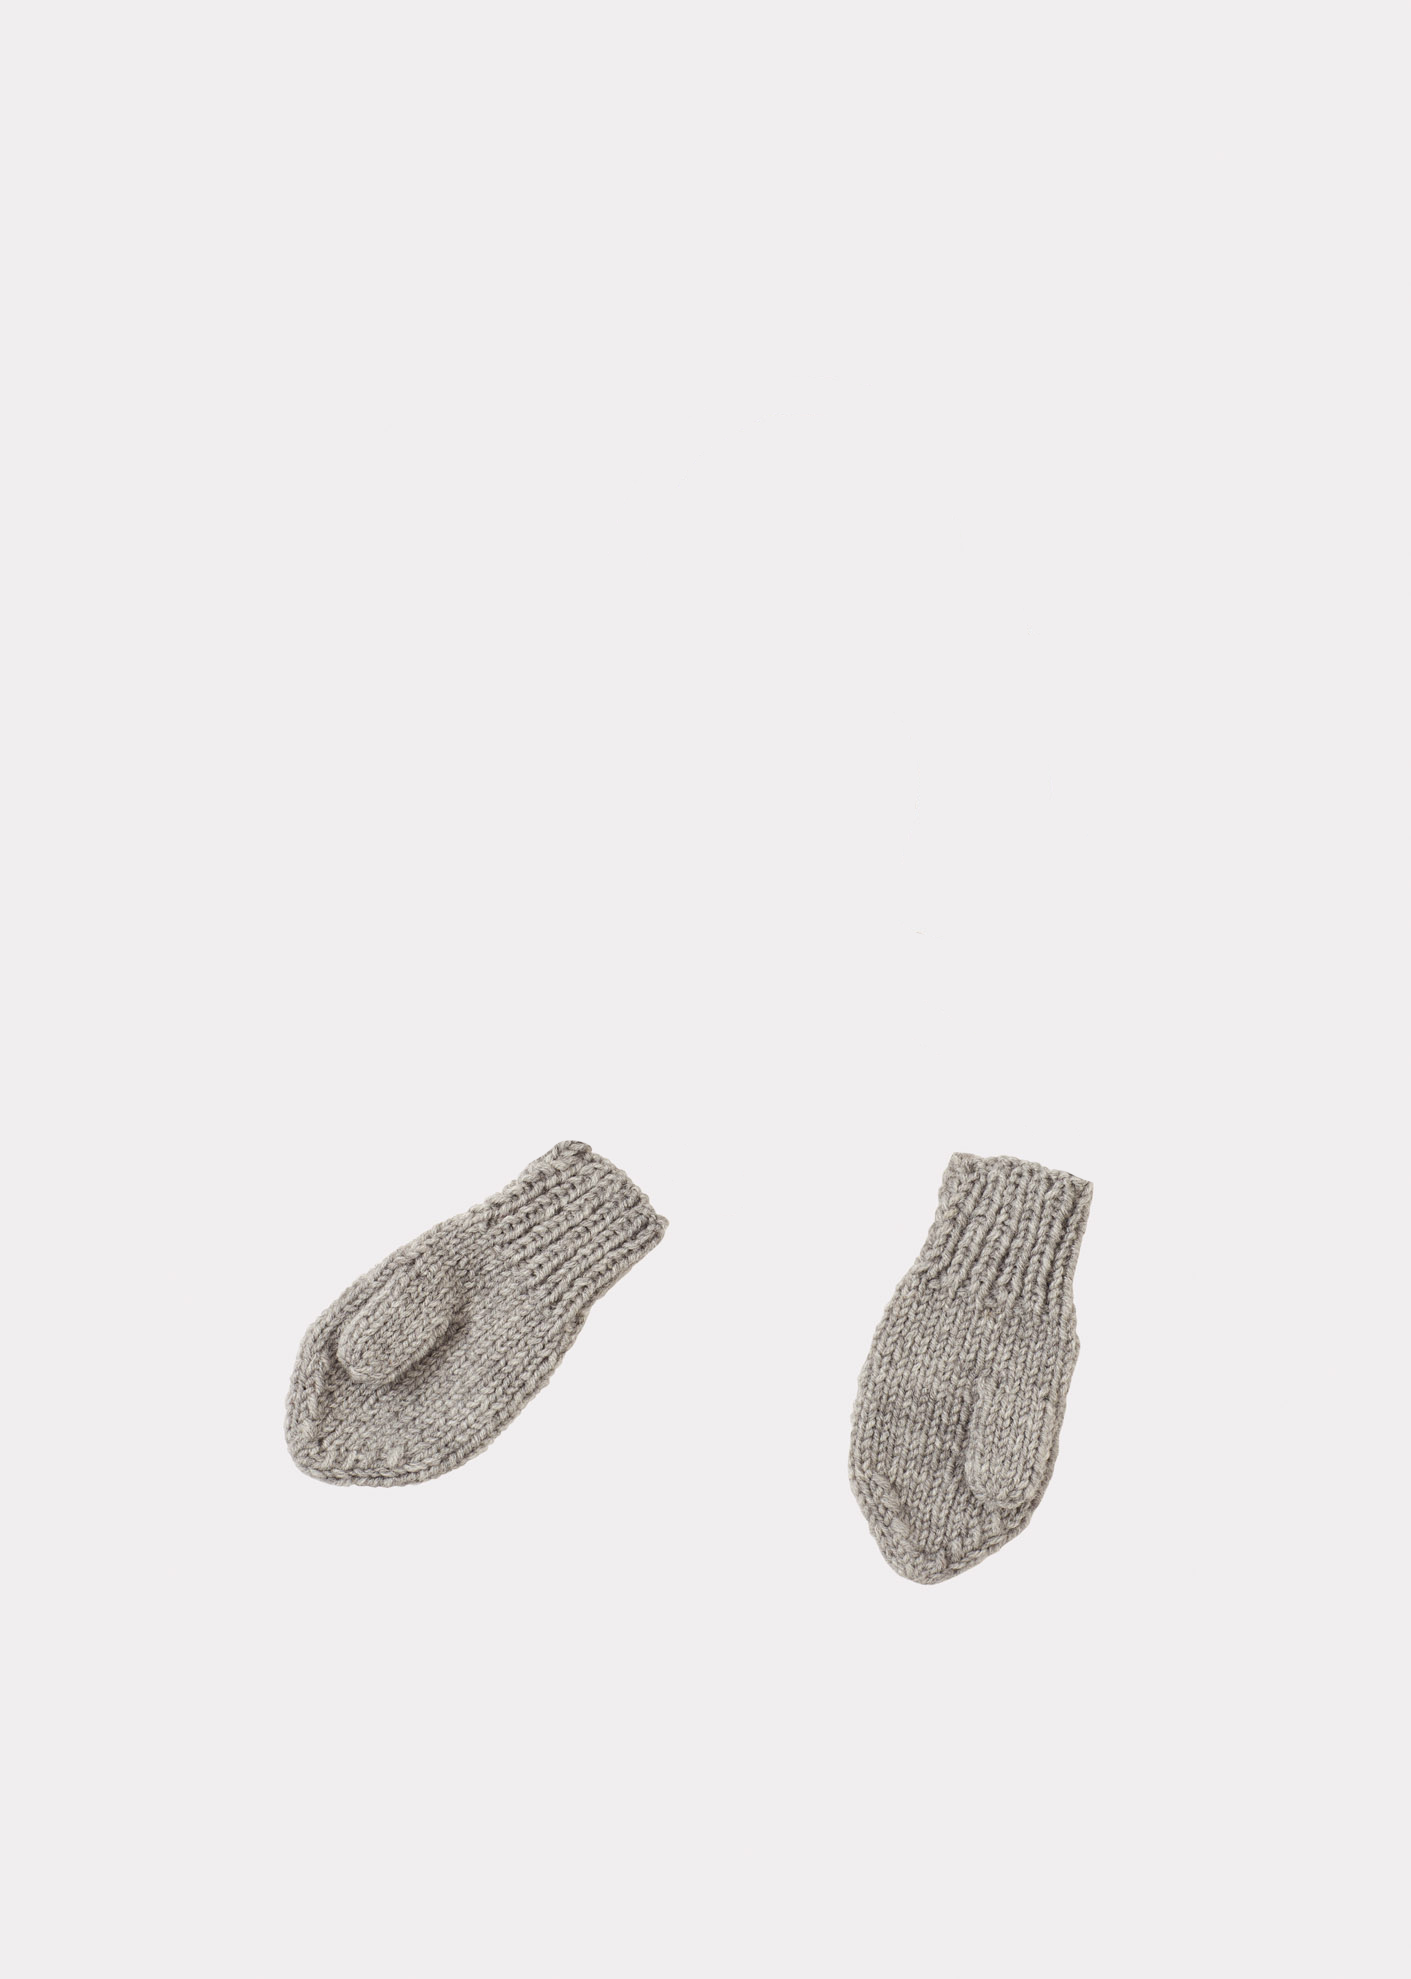 APO EMBROIDERED MITTENS - GREY/RED MULTI